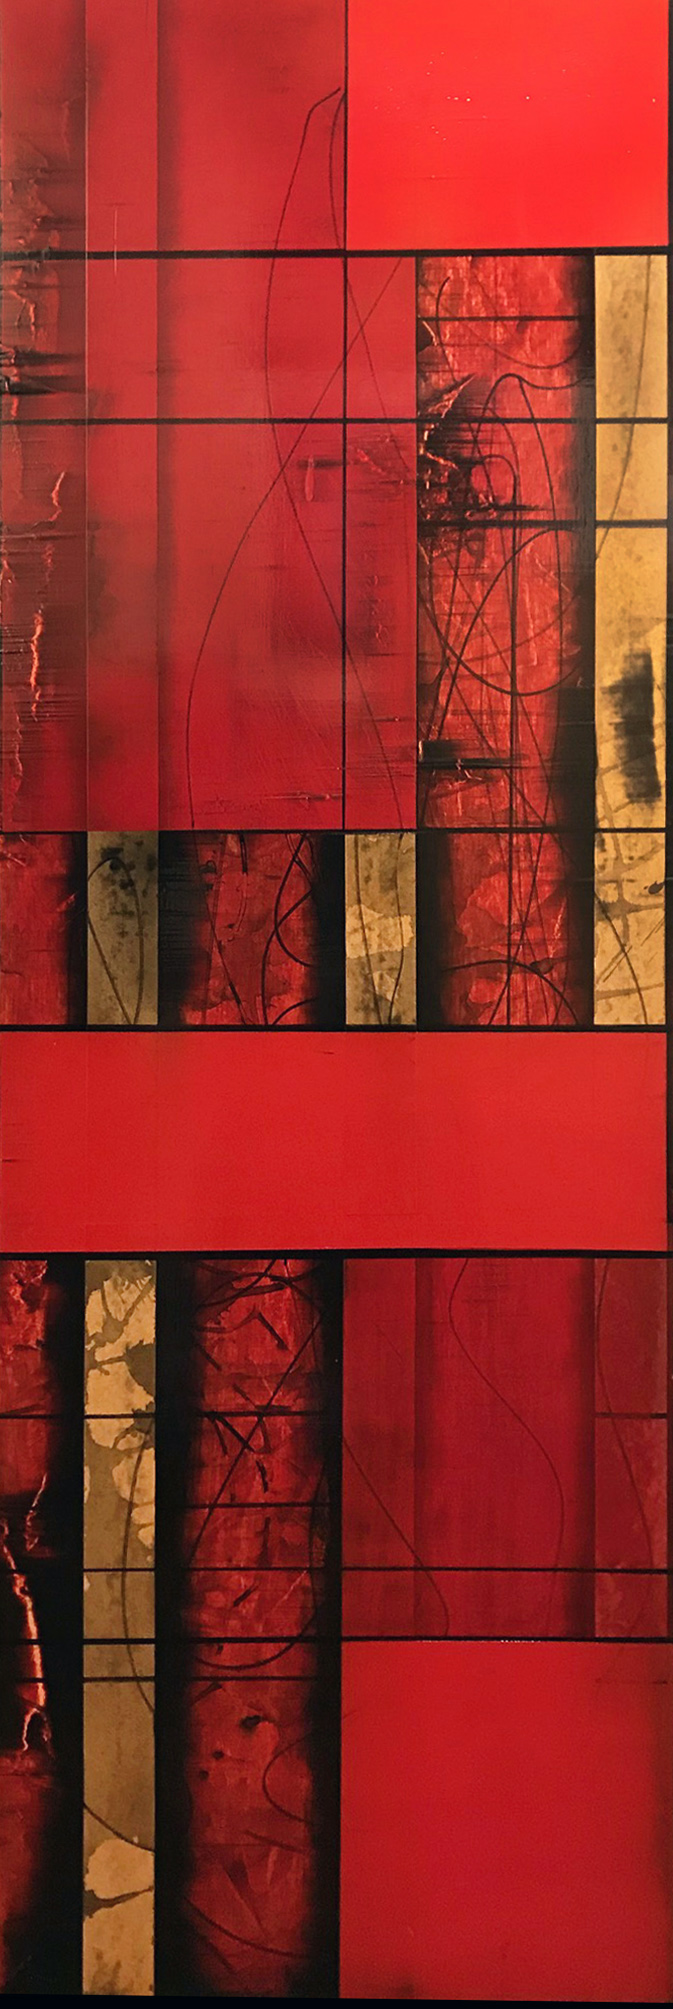 REDSIDER 21, acrylic on panel, 60 x 20 inches